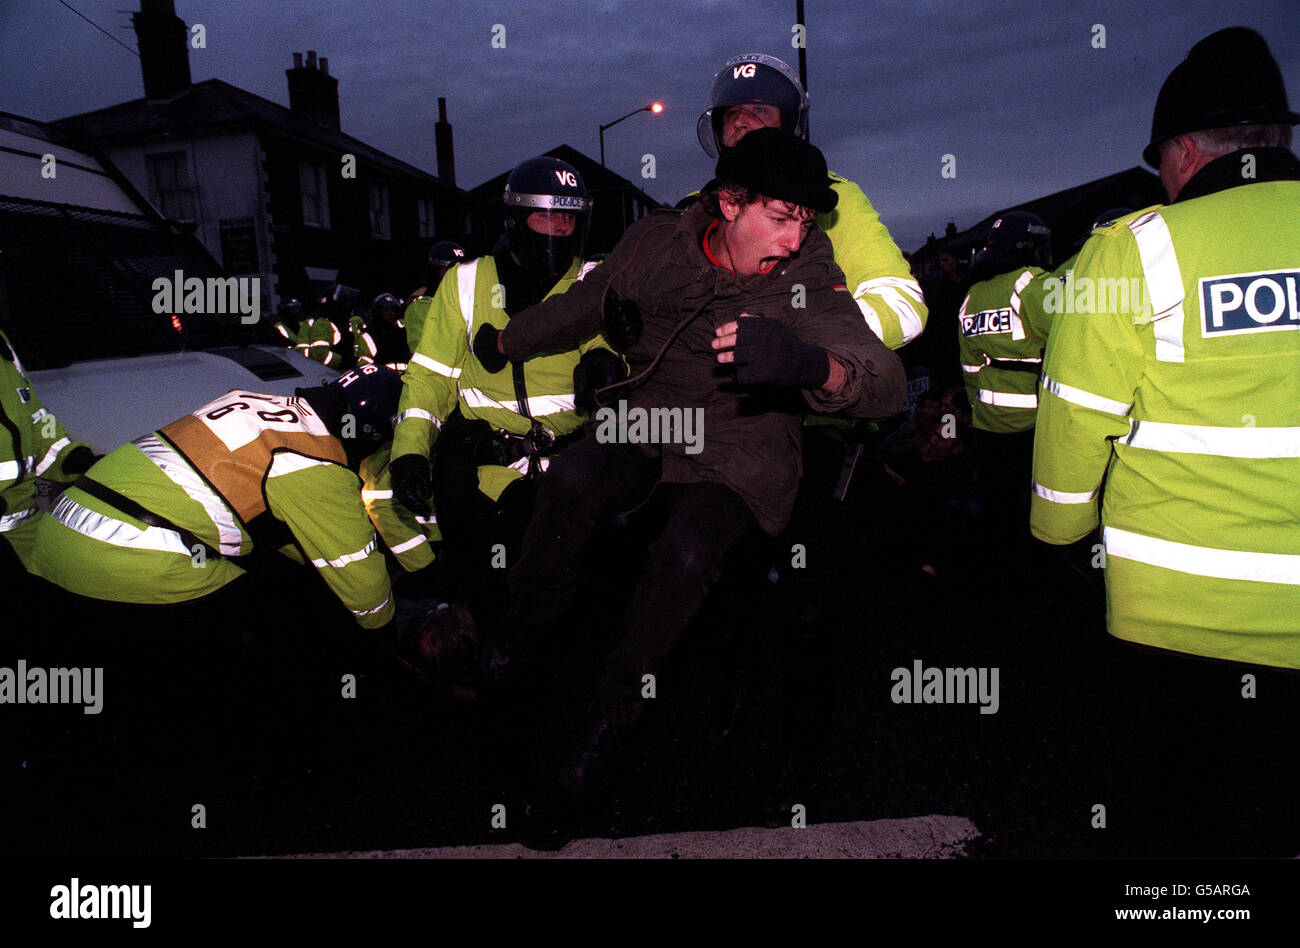 BRIGHTLINGSEA 1995: Police and protestors clash as 4 lorries, laden with live lambs being exported to the Continent, try to pass through a sit-in on the dockside at the Essex port of Brightlingsea. About 500 locals tried to halt the convoy of lorries escorted by 9 police vans. Stock Photo